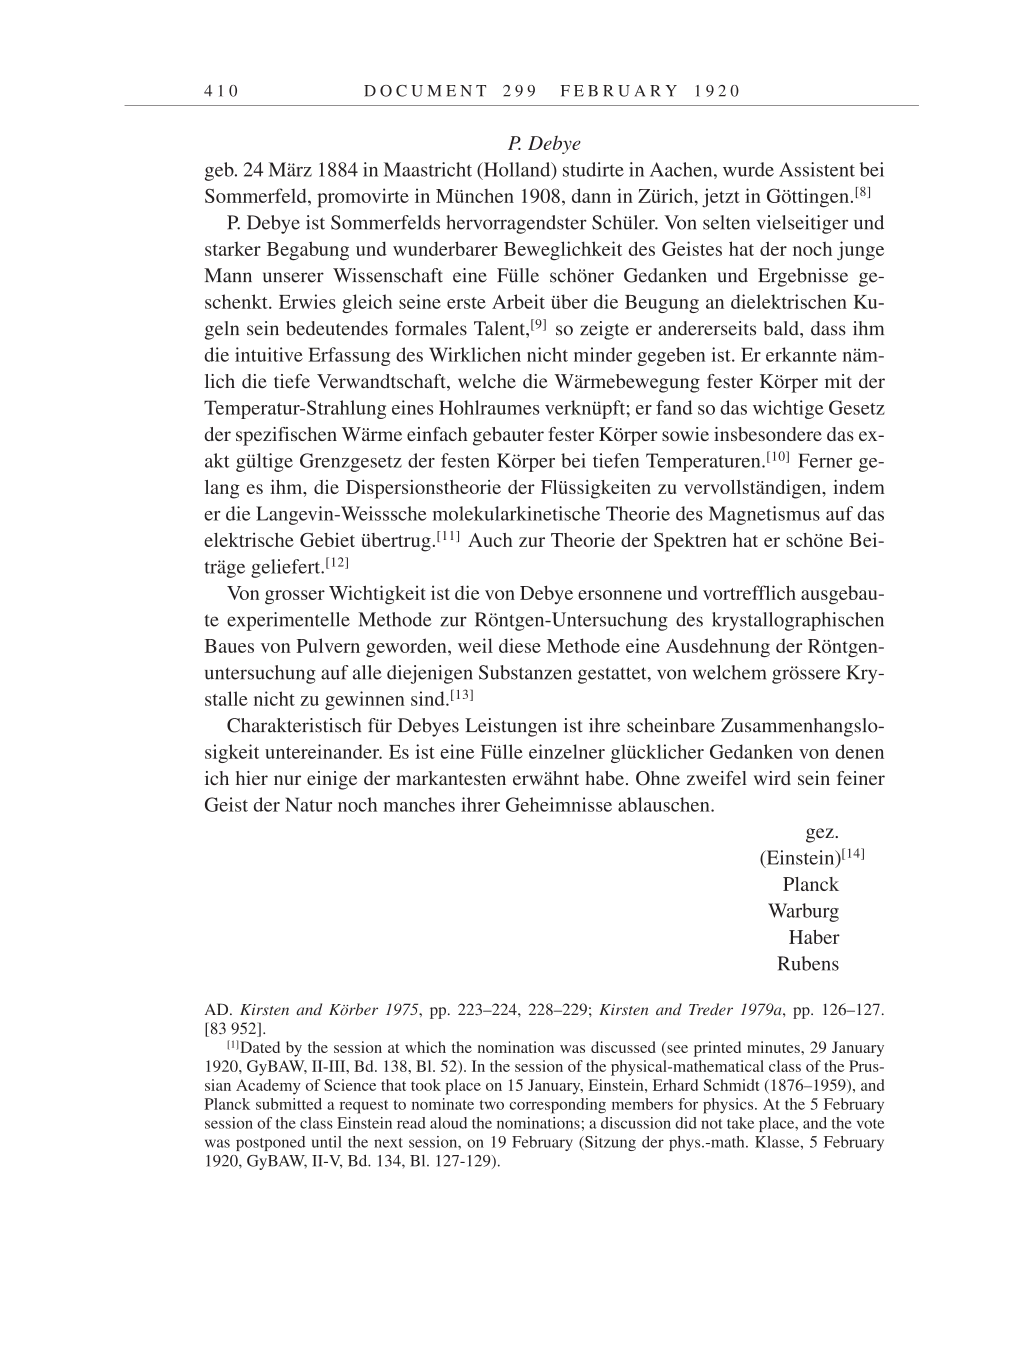 Volume 9: The Berlin Years: Correspondence January 1919-April 1920 page 410